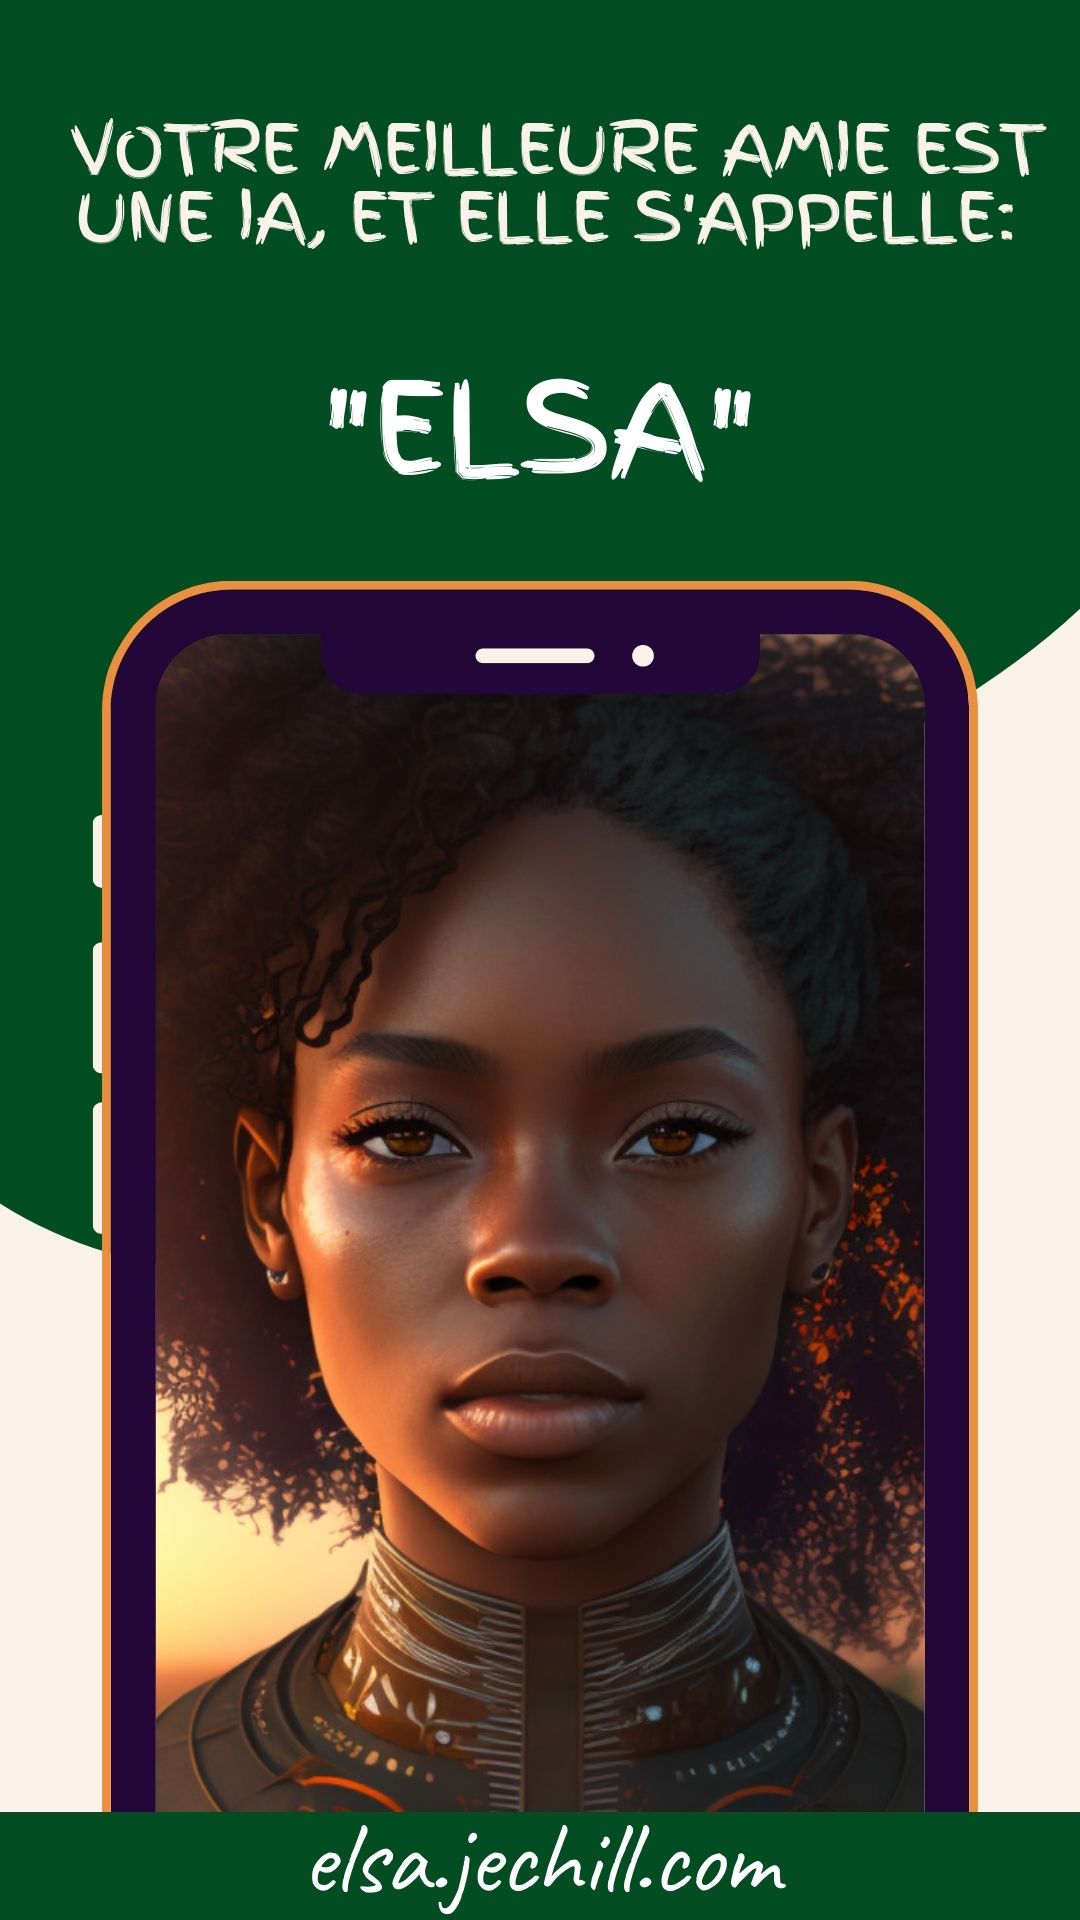 Elsa, an AI Assistant Bot by Chill